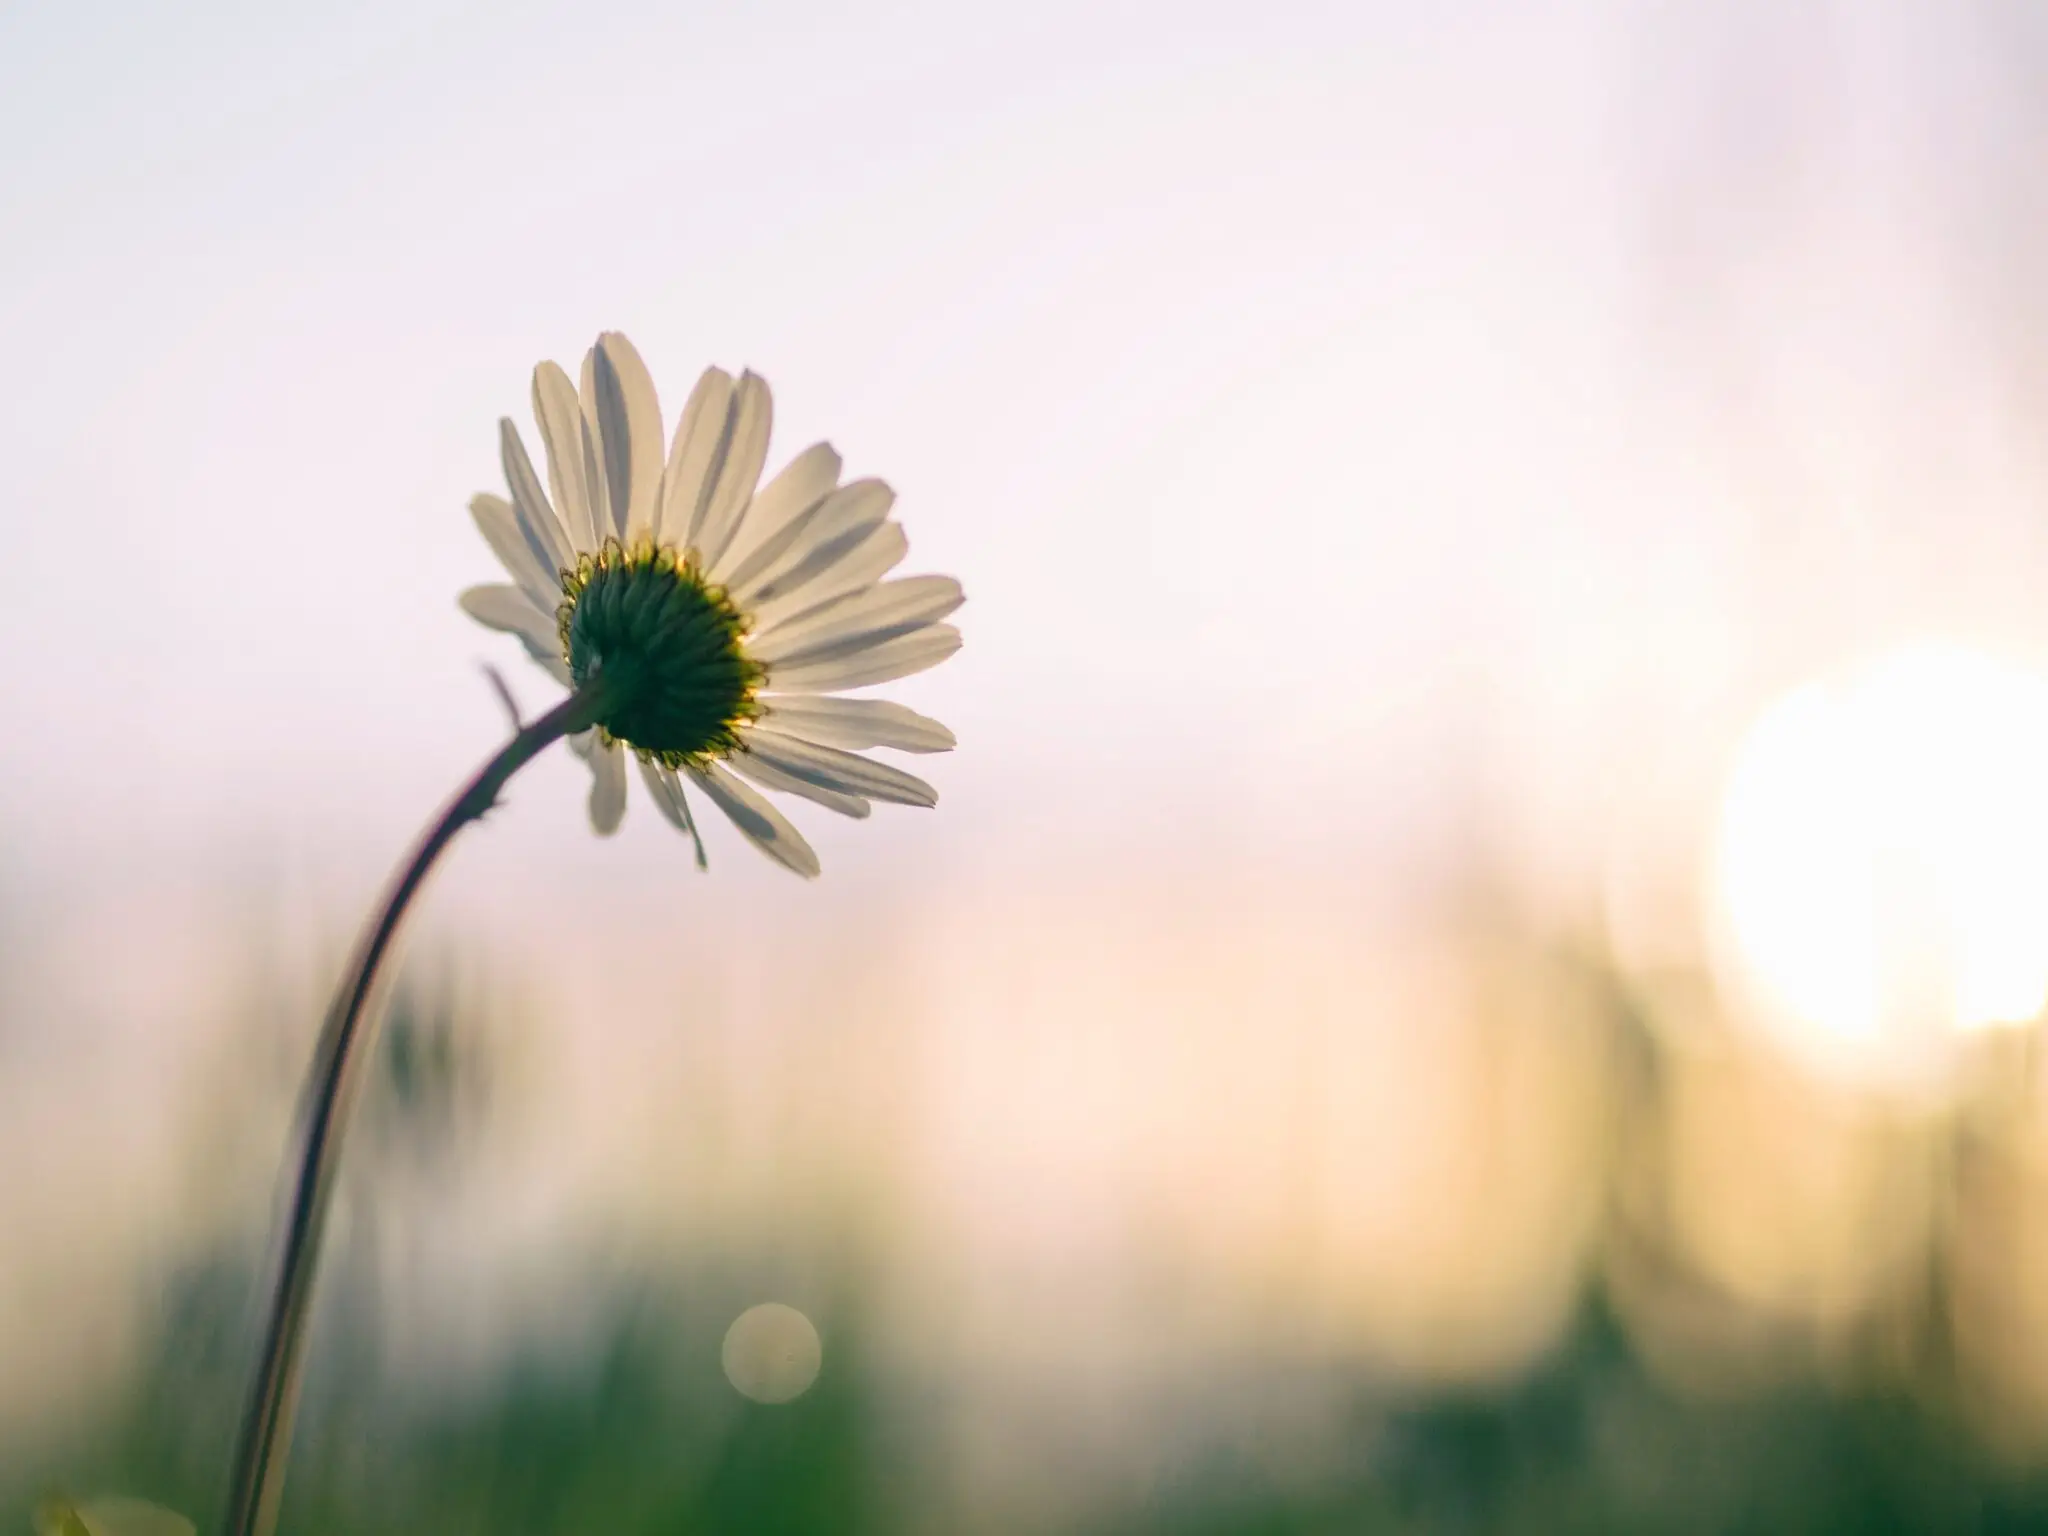 A single daisy flower in the foreground, symbolizing hope and growth, represents the essence of EMDR Therapy.